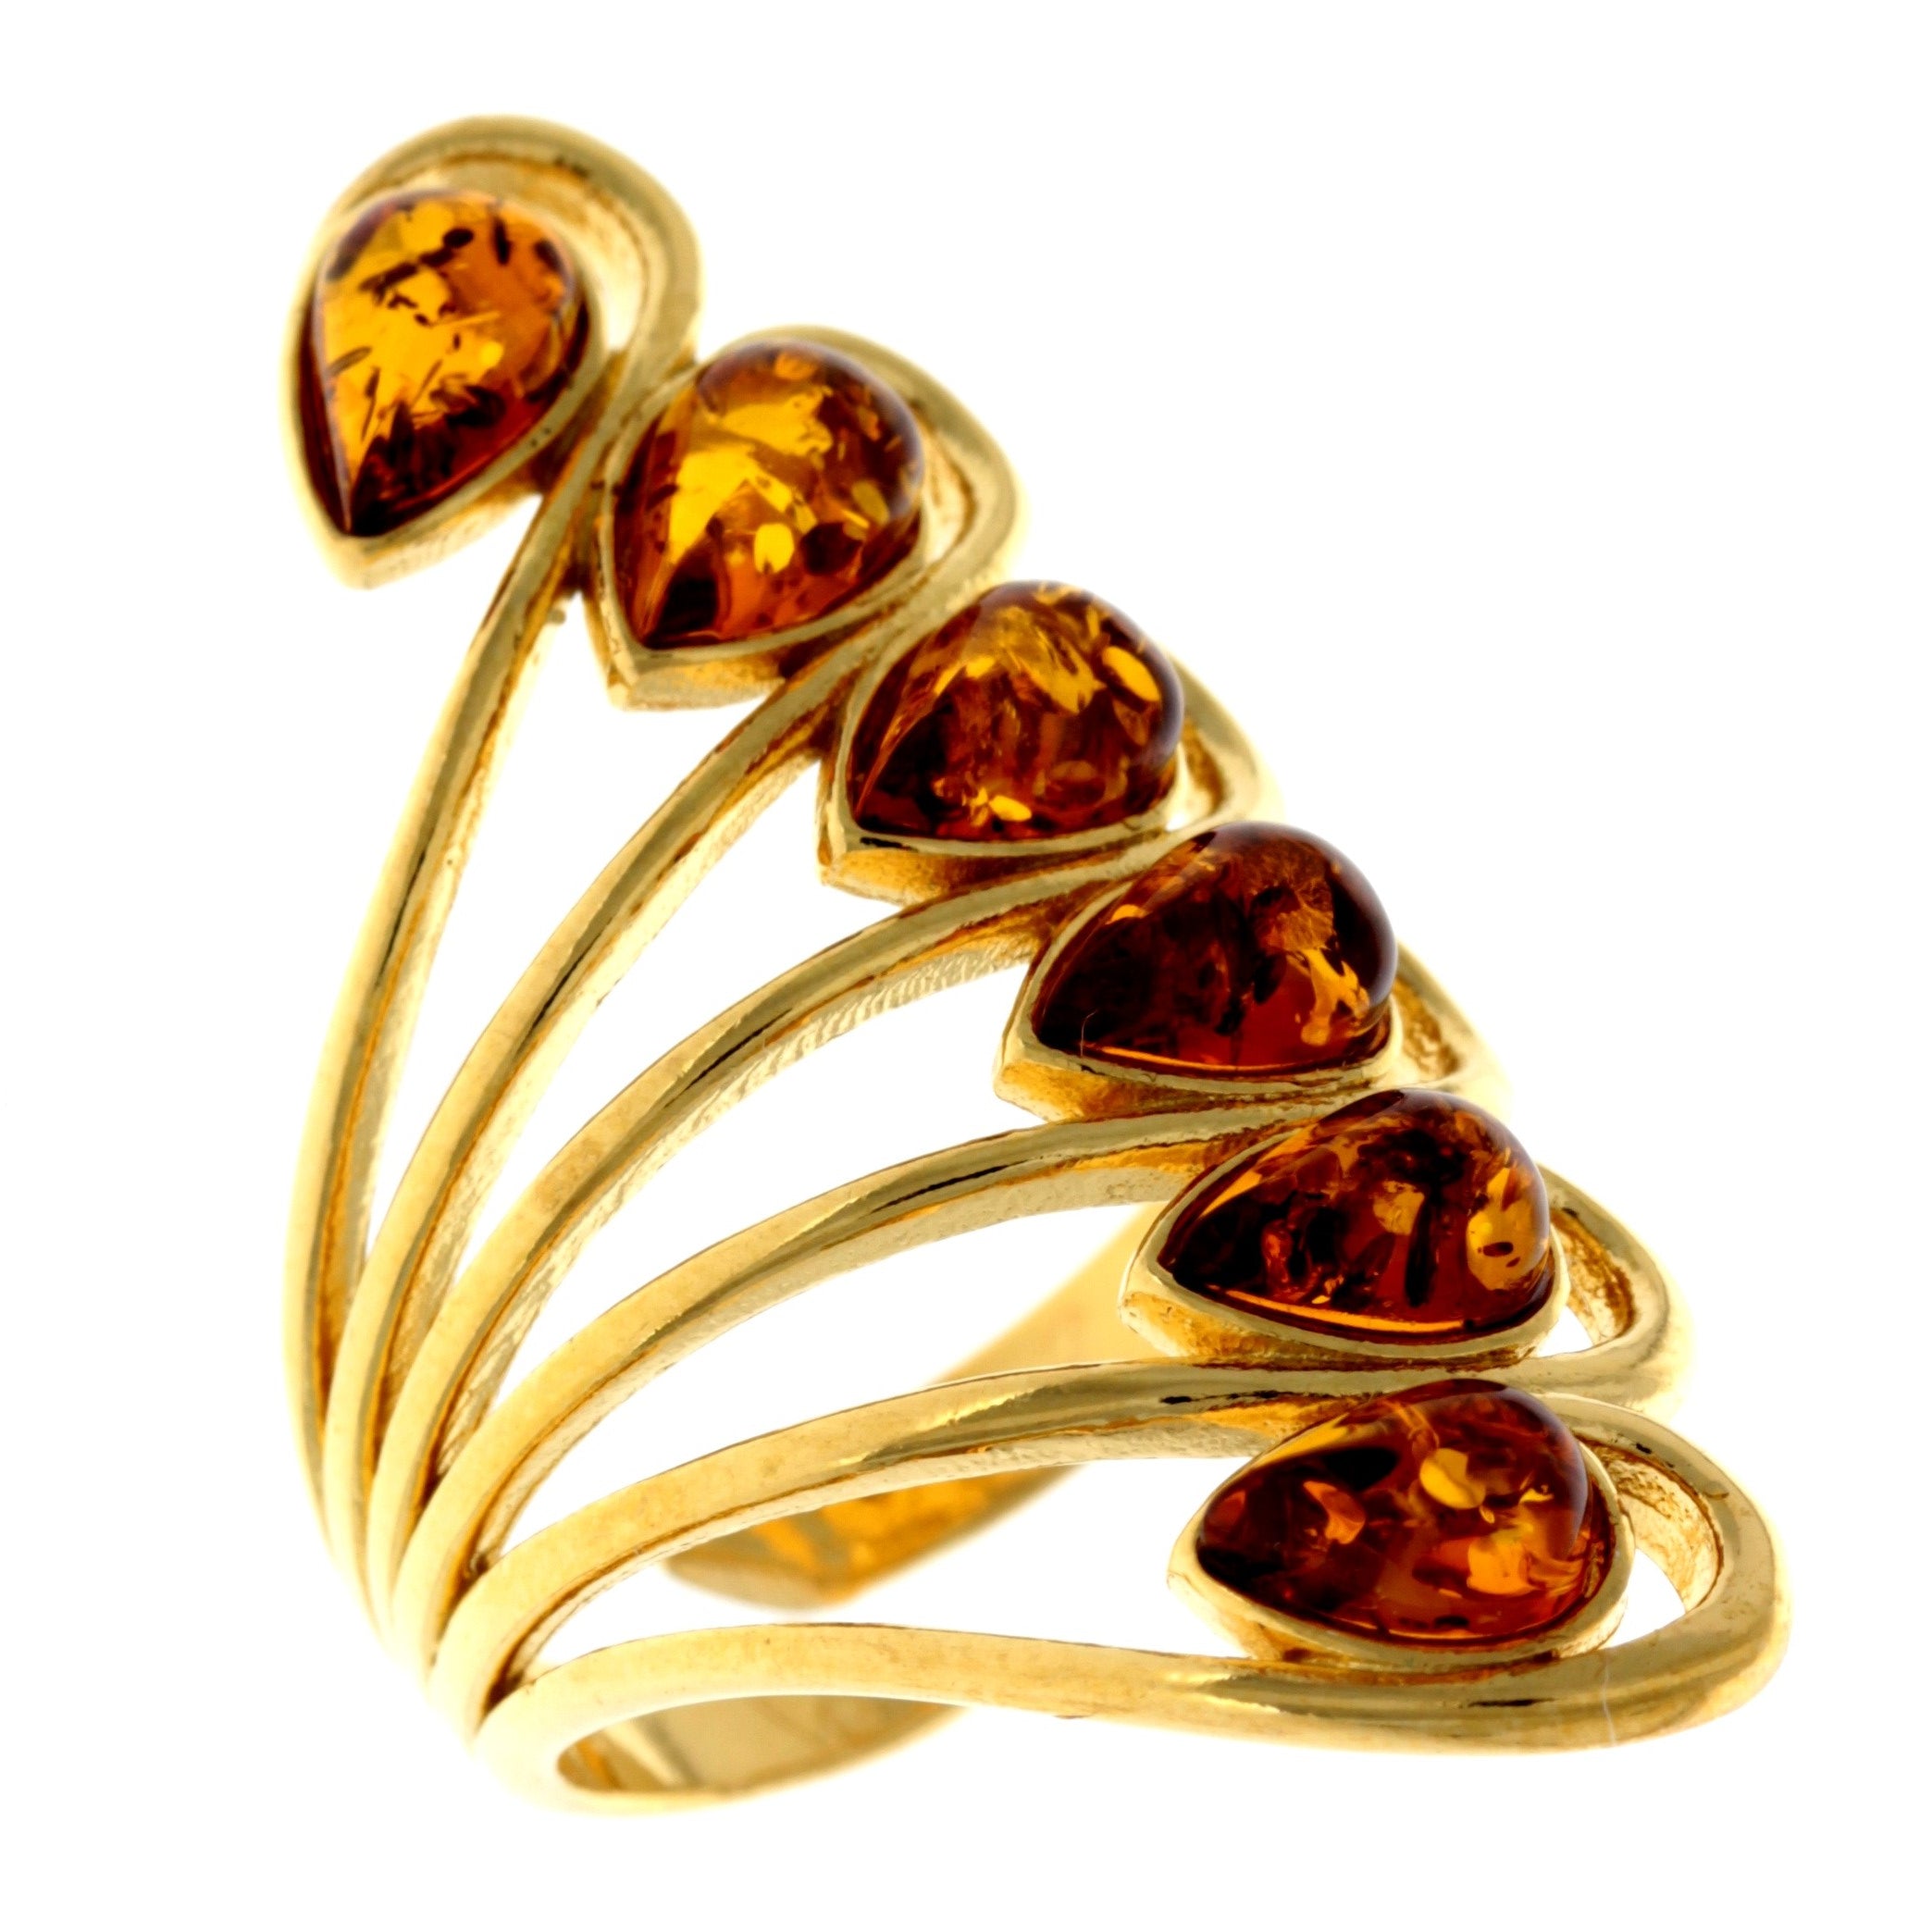 Genuine Baltic Amber and 925 Sterling Silver Gold Plated with 1 micron of 22 Carat Gold Adjustable Ring - MG400